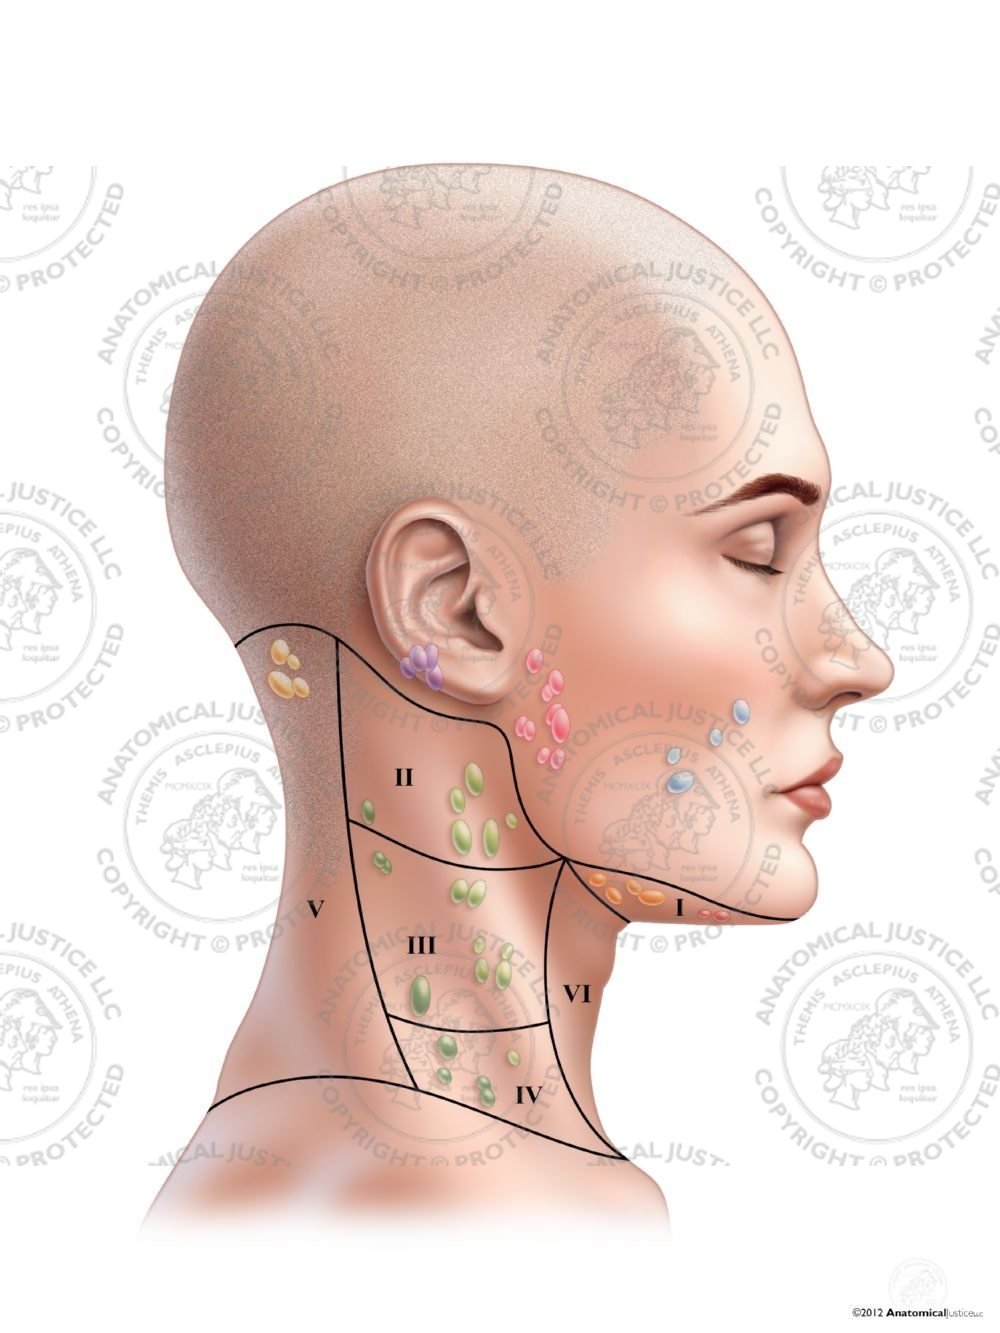 Female Right Lymph Nodes and Regions of the Neck – No Text